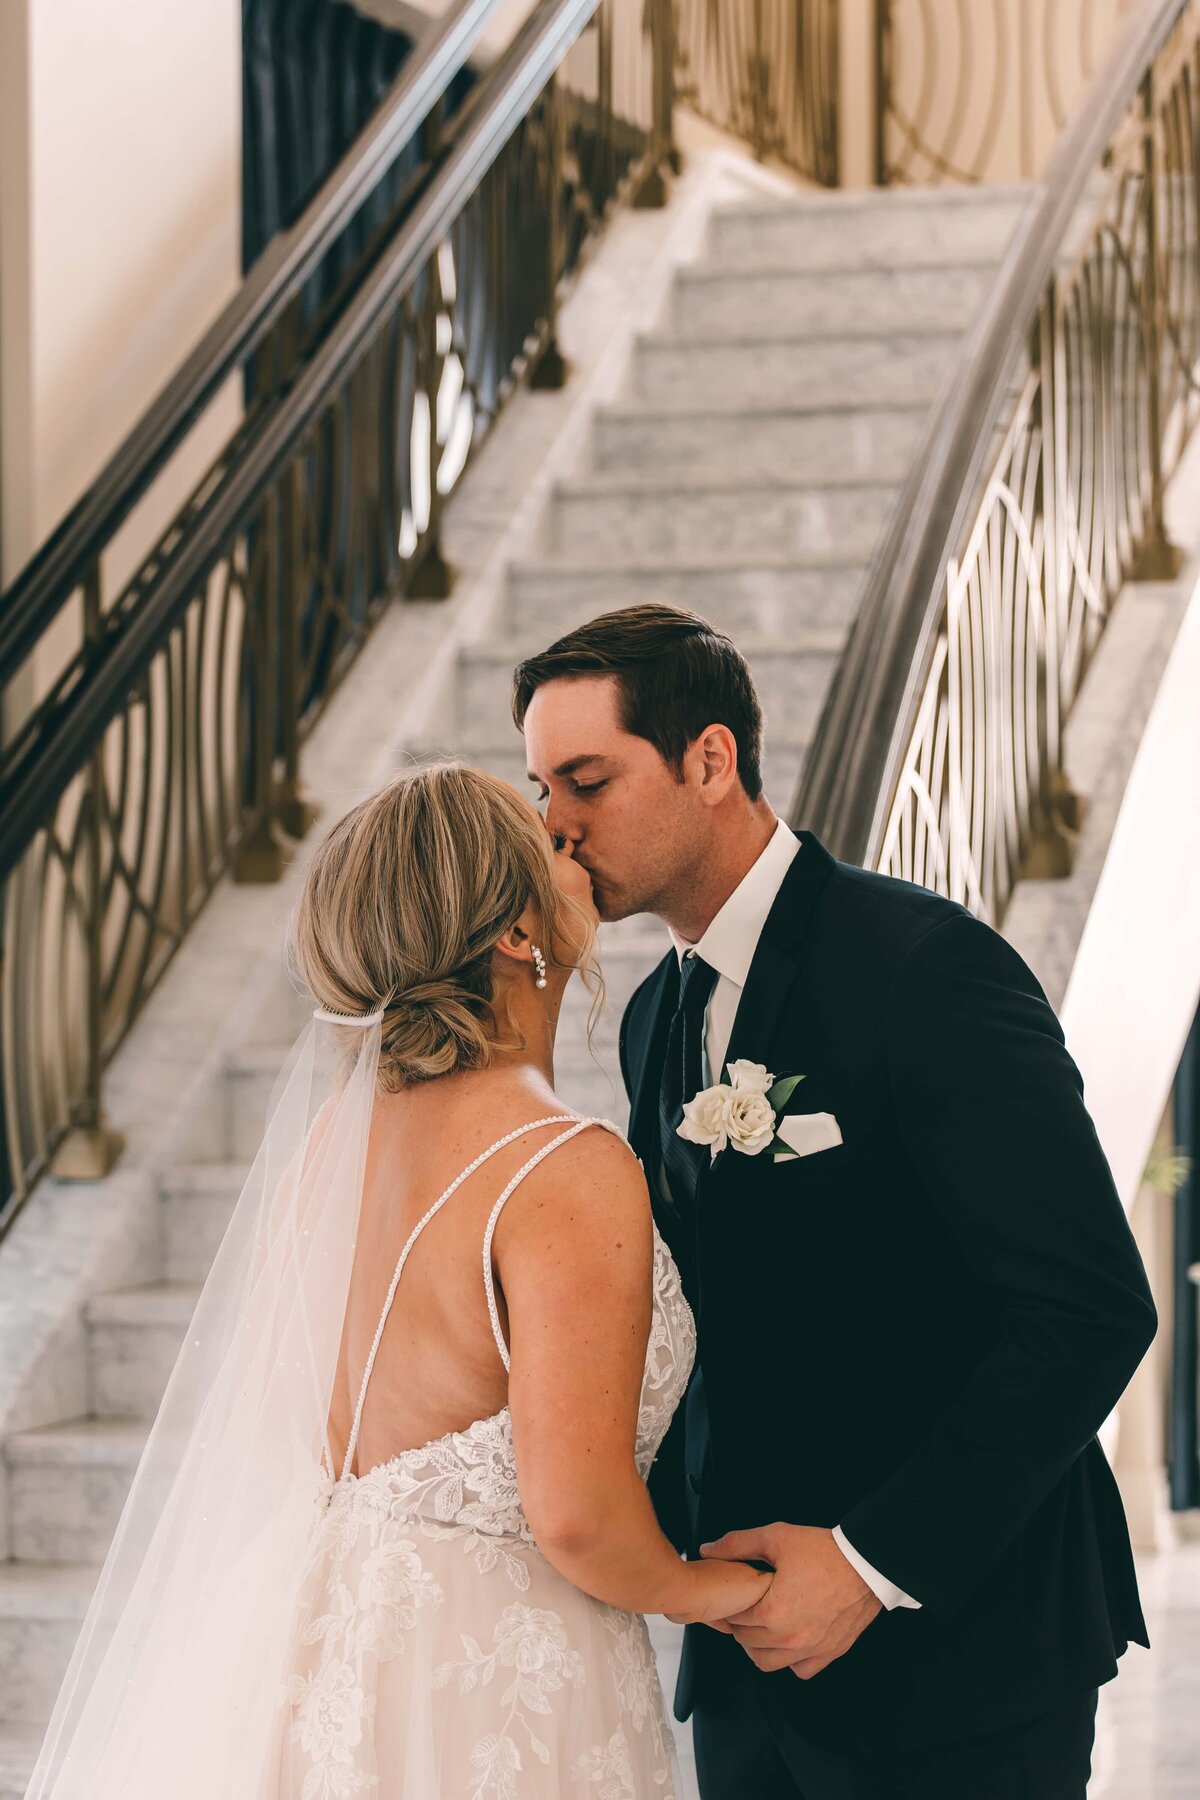 A bride and groom share a kiss on a staircase at their Iowa wedding, with the groom dressed in a black suit and the bride in a white lace gown with a veil.